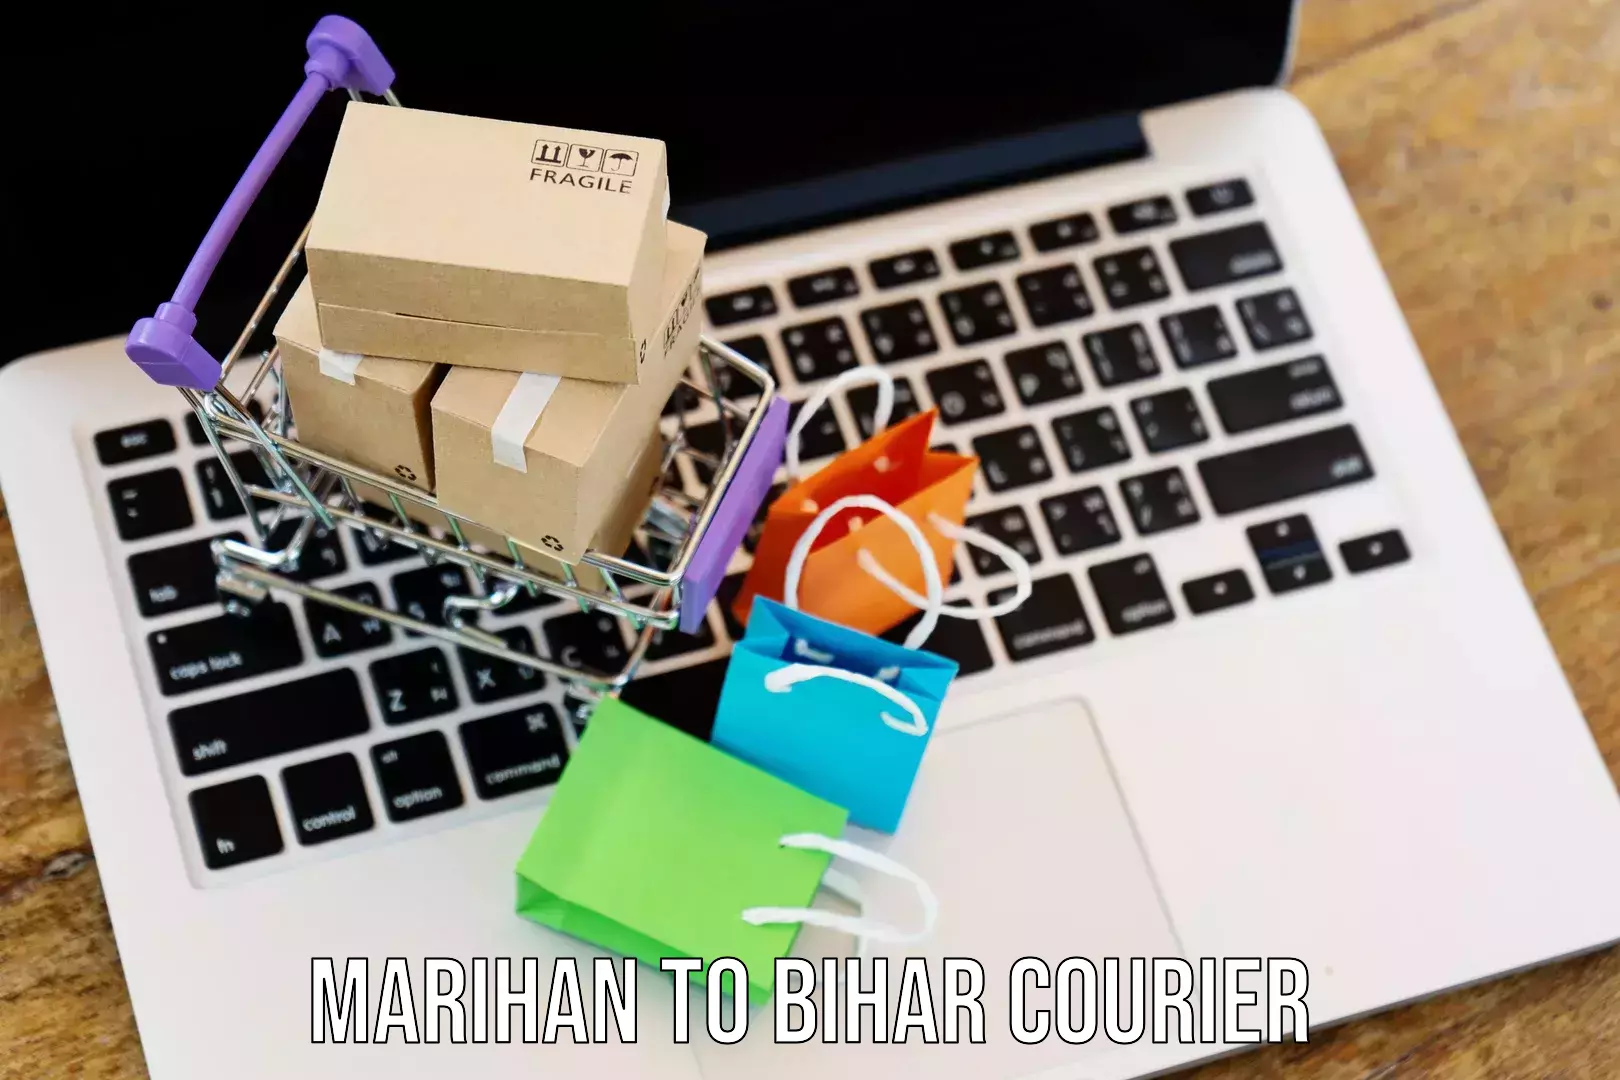 Personal parcel delivery Marihan to Rusera